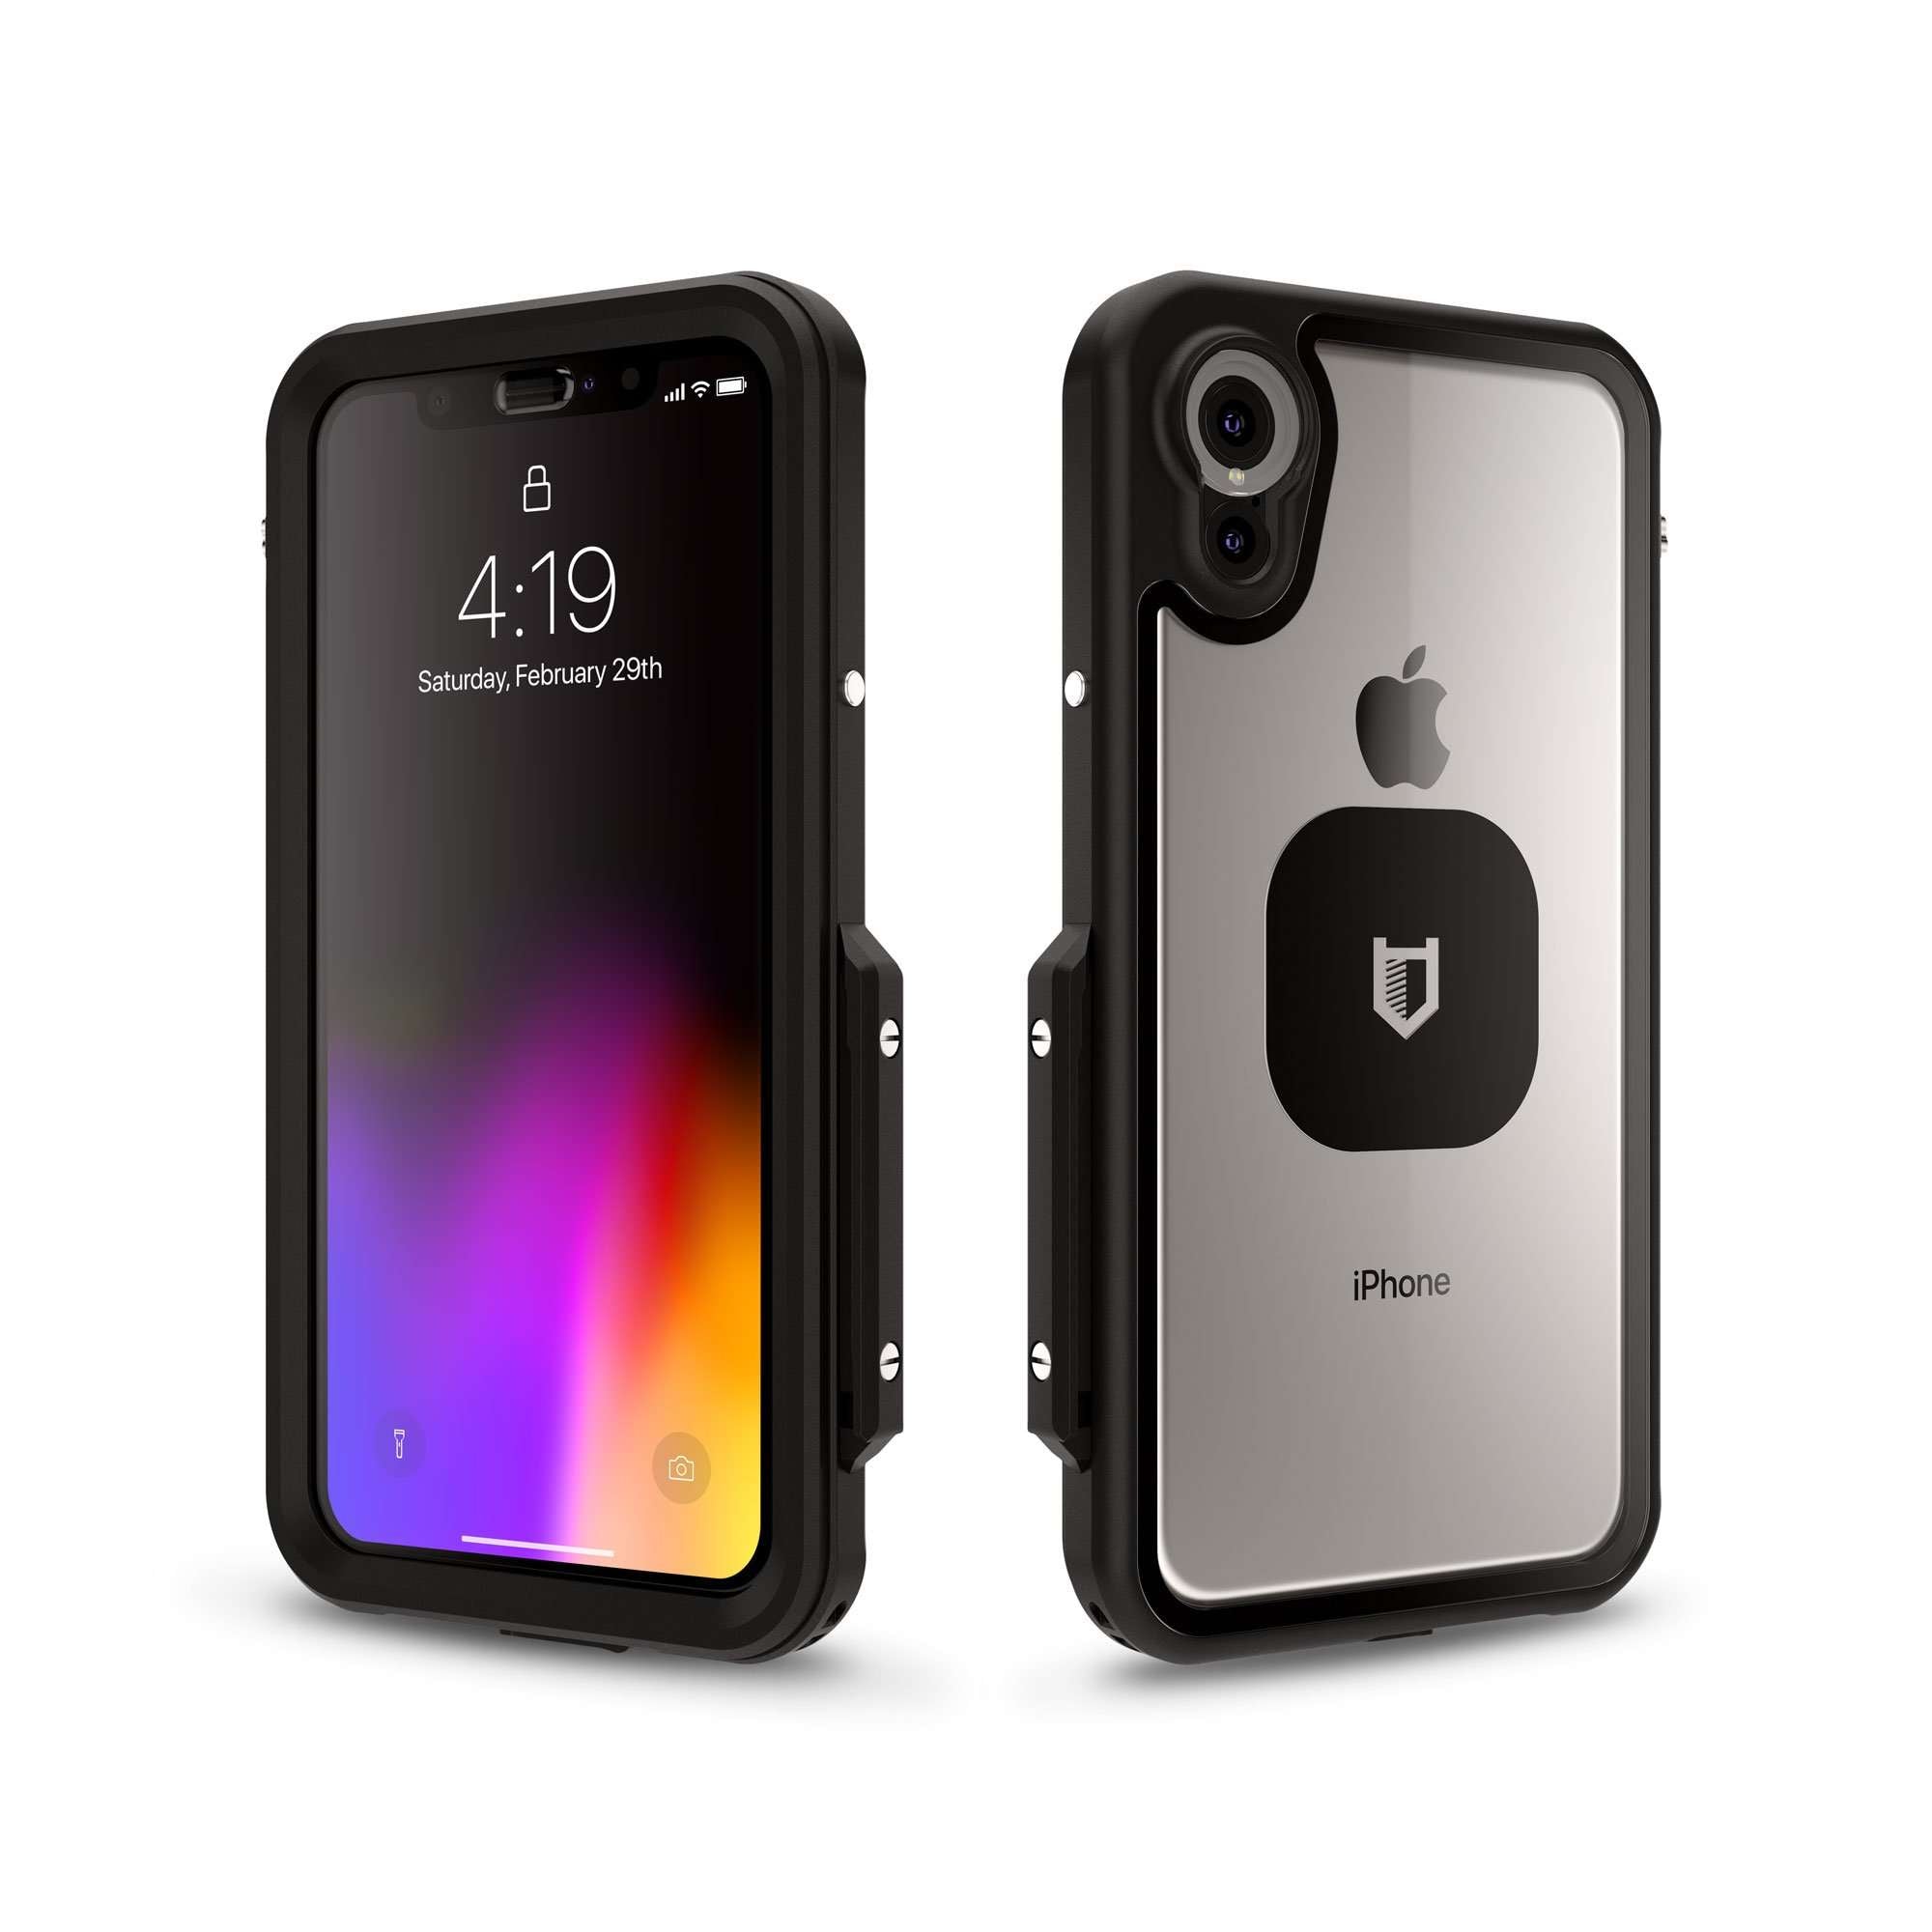 12 Best iPhone XS Max Cases in 2019 - Protective Cases for iPhone